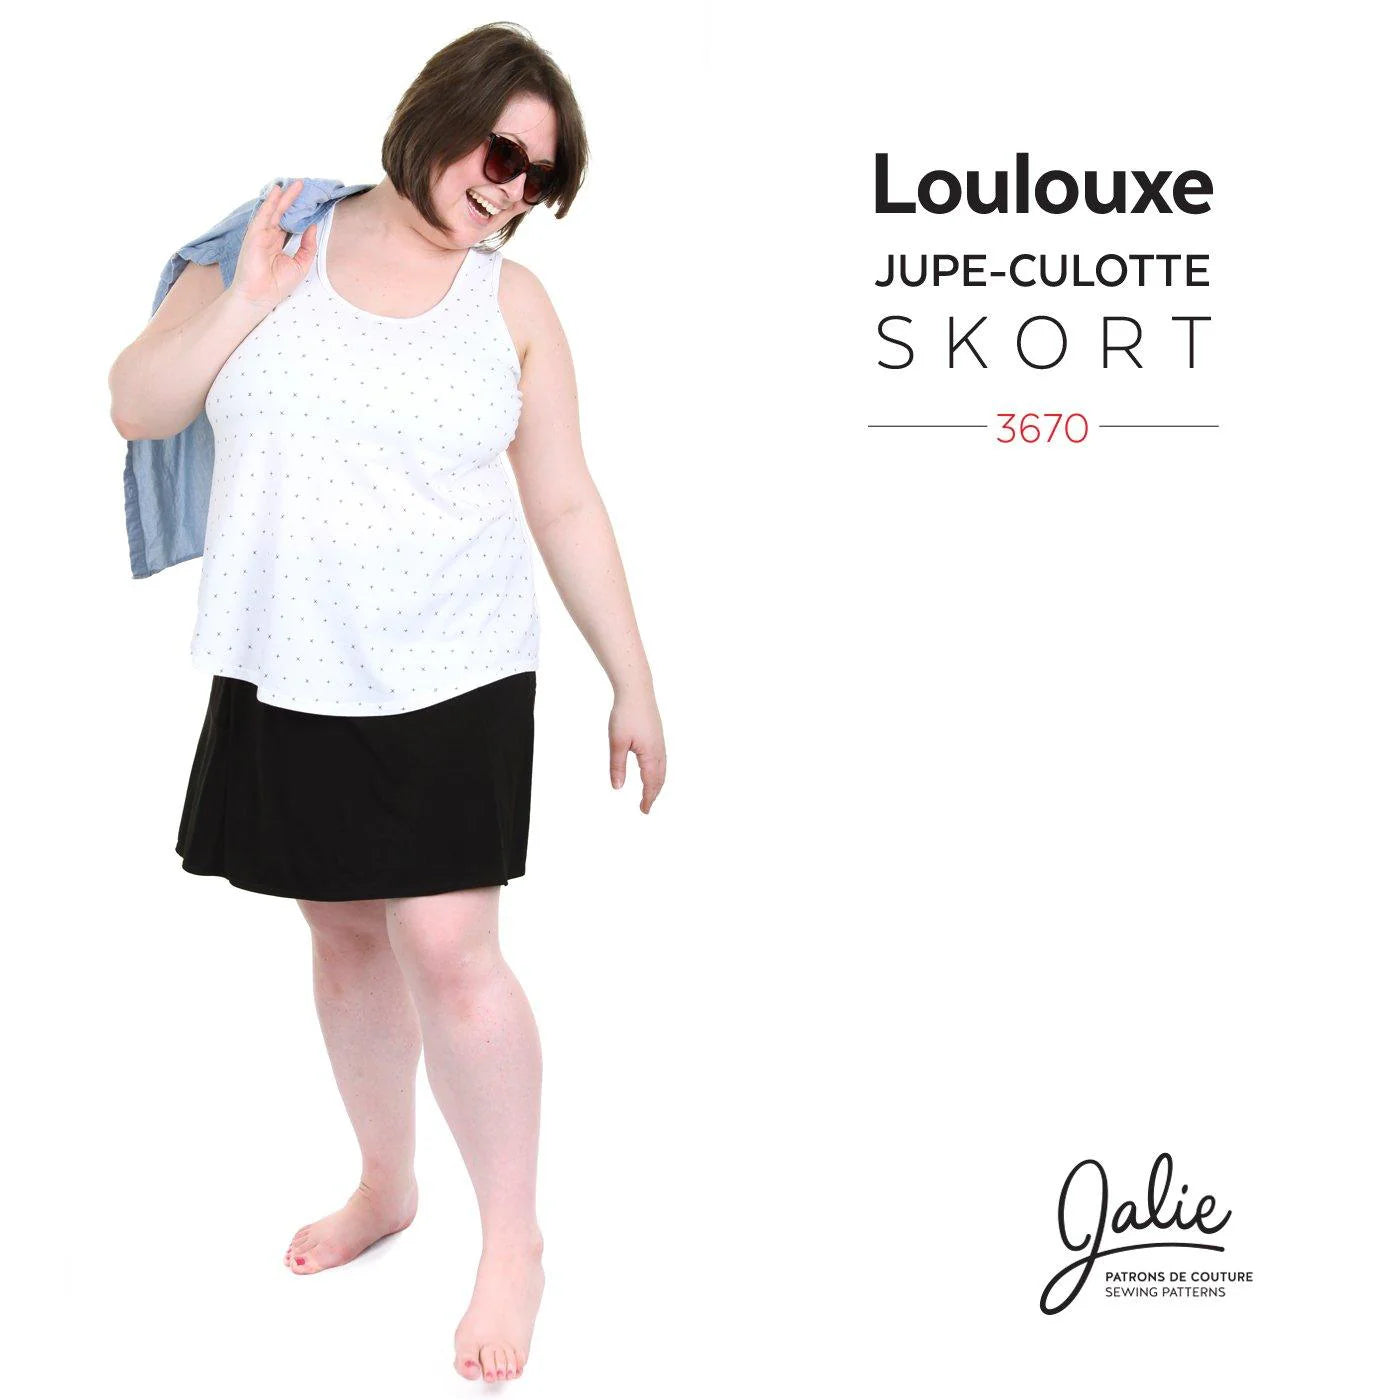 Jalie - 3670 - LOULOUXE